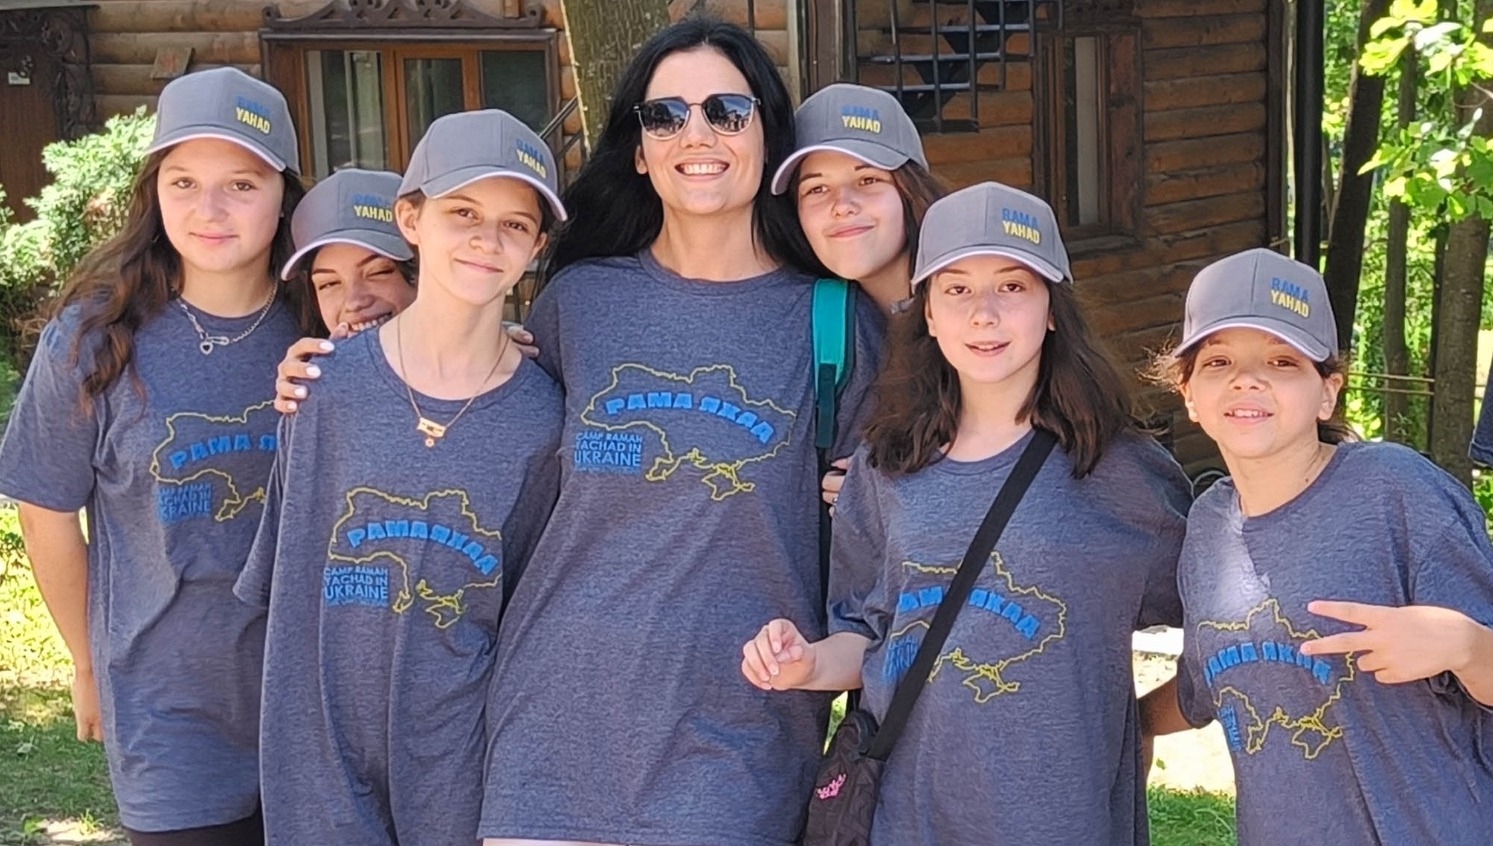 Campers and a counselor at Ramah Yachad pose in their 2023 T-shirts, showing an outline of Ukraine for the first session in the country since Russia invaded in 2022. (Courtesy Midreshet Schechter)